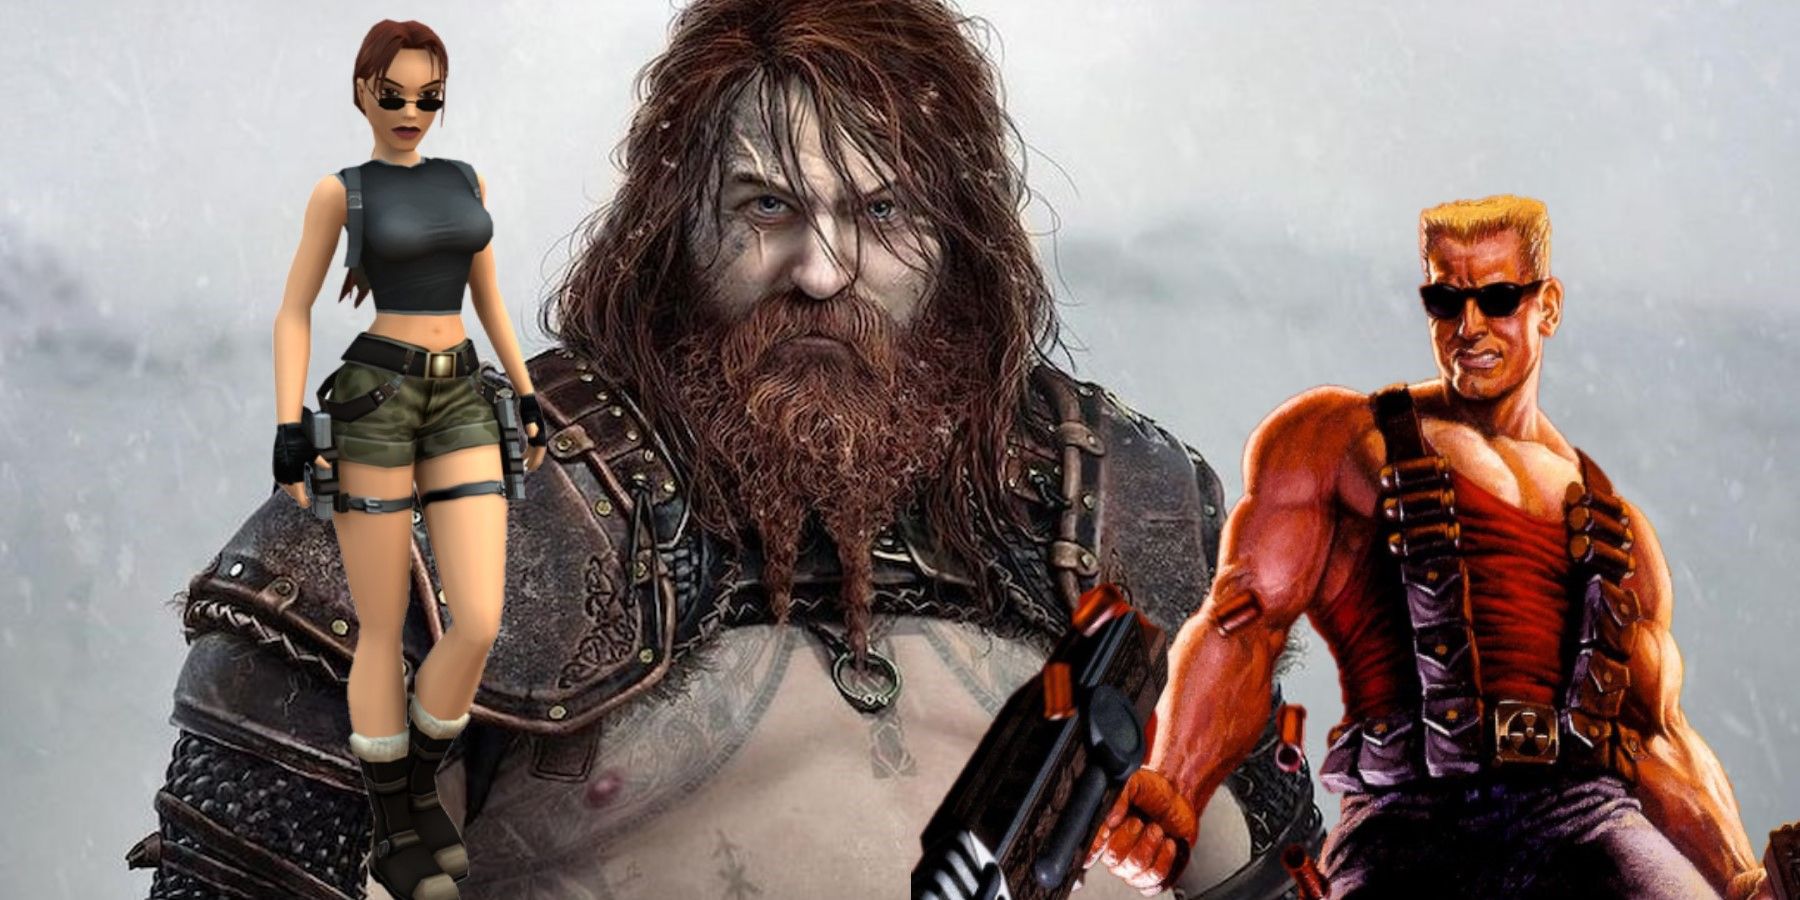 God of War's Thor Isn't Just Accurate, It's A Win For Body Diversity